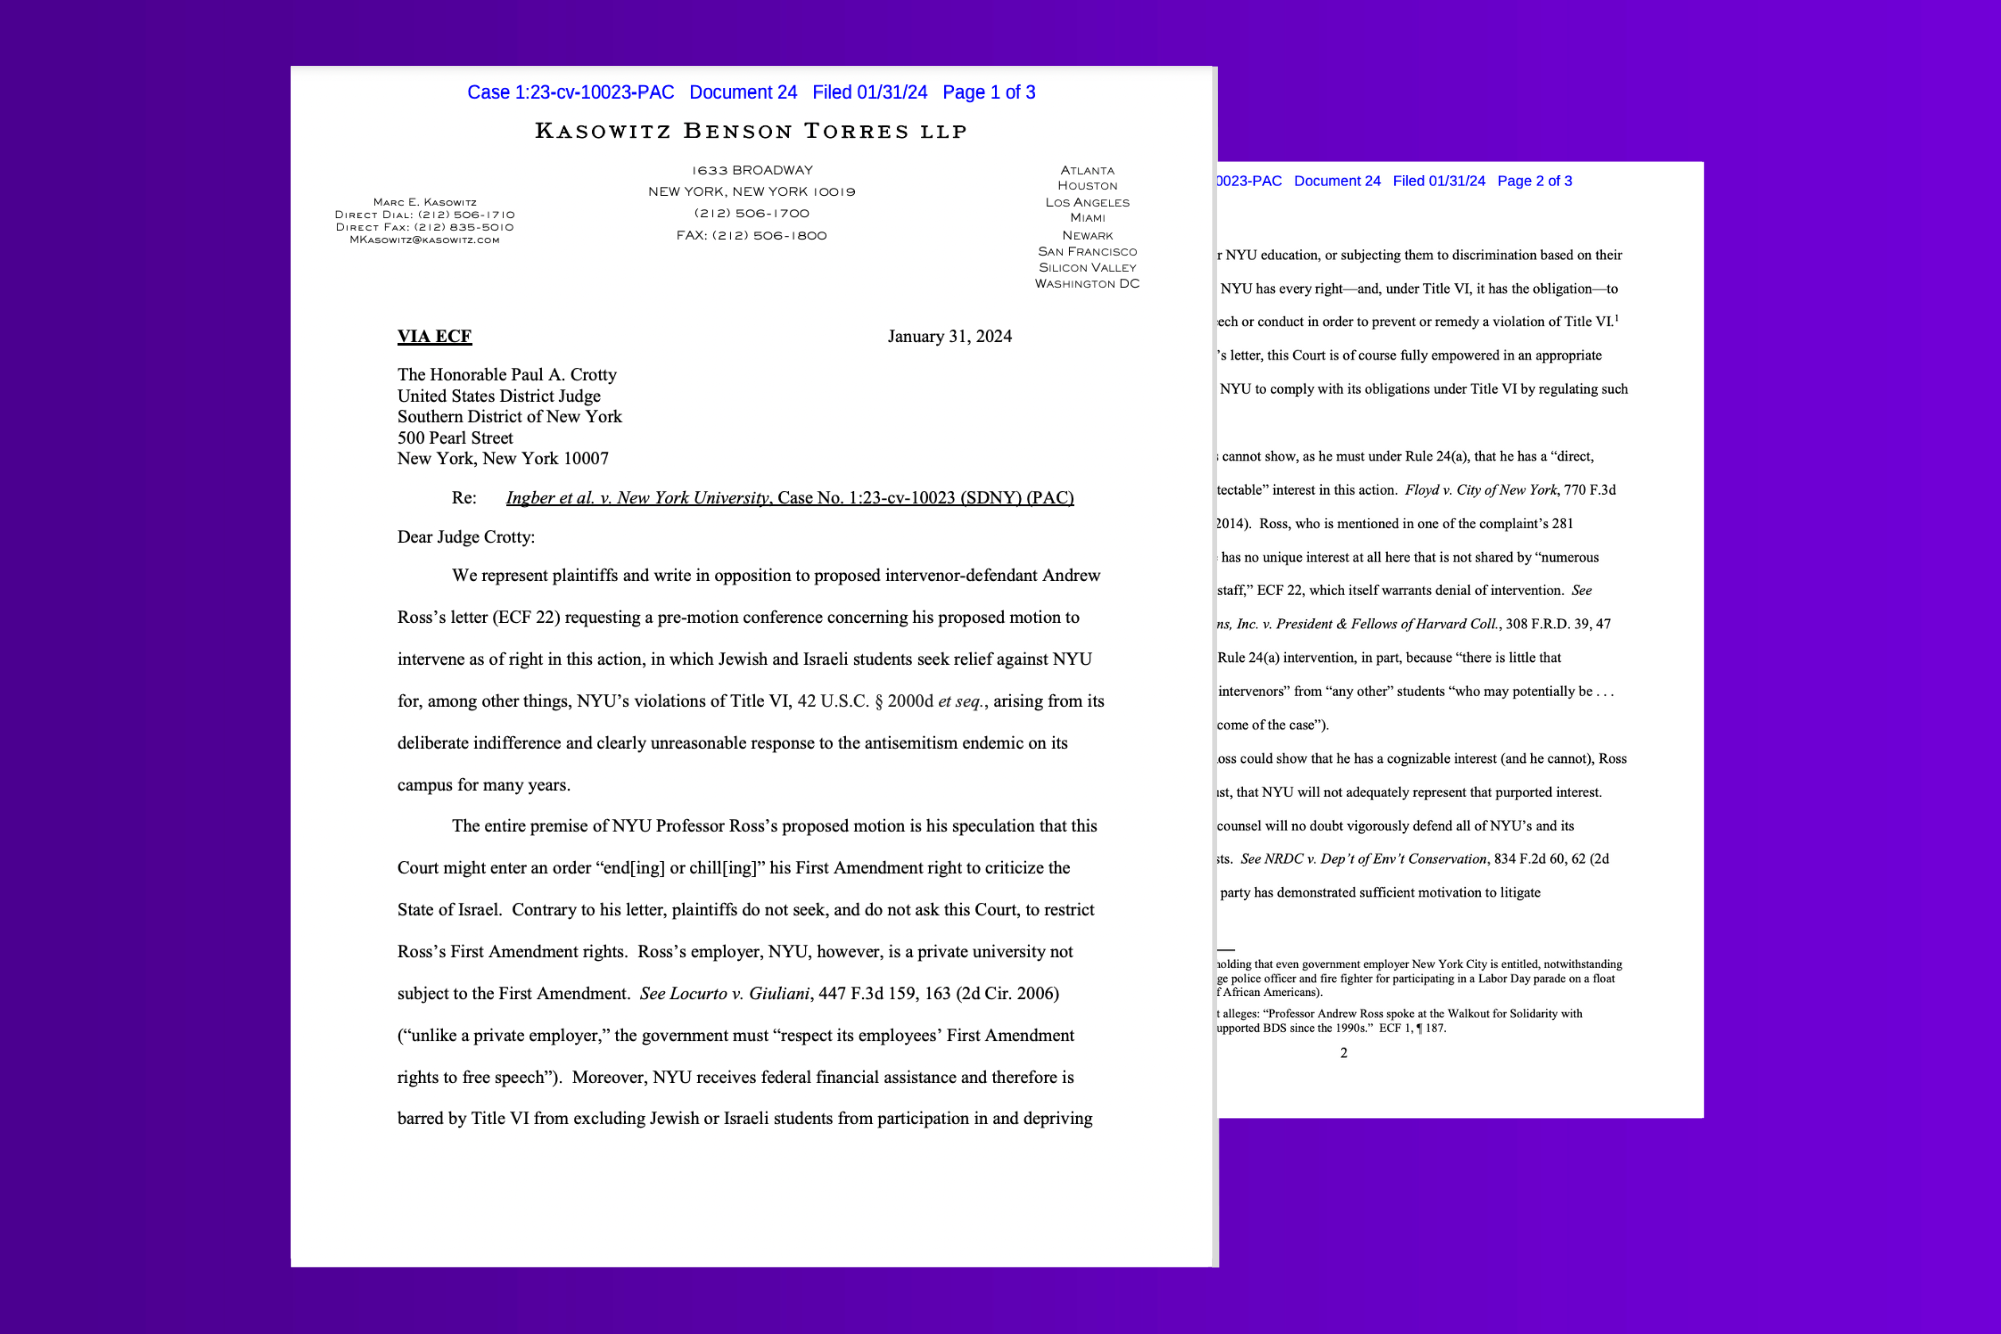 An image of a letter with the text “Ingber et al. v. New York University” underlined. The letter is two pages and is in front of a purple background.